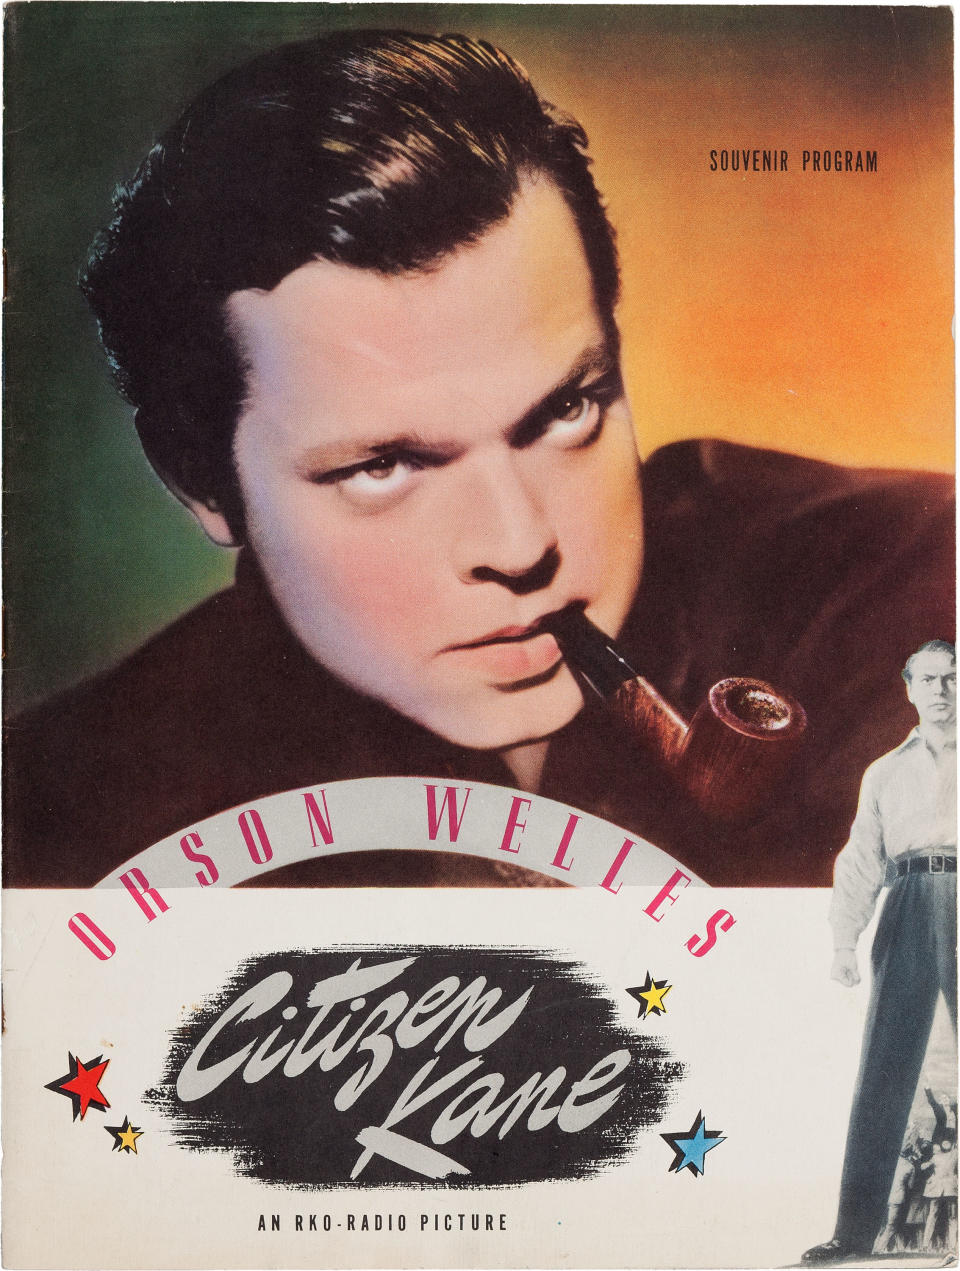 This photo provided by Heritage Auctions shows Orson Welles' personal copy of a souvenir program from his classic 1941 film, "Citizen Kane," which is among the legendary actor, director and scriptwriter's items consigned by his daughter, Beatrice Welles, that will be offered by Heritage Auctions in New York City on April 26, 2014. (AP Photo/Heritage Auctions)